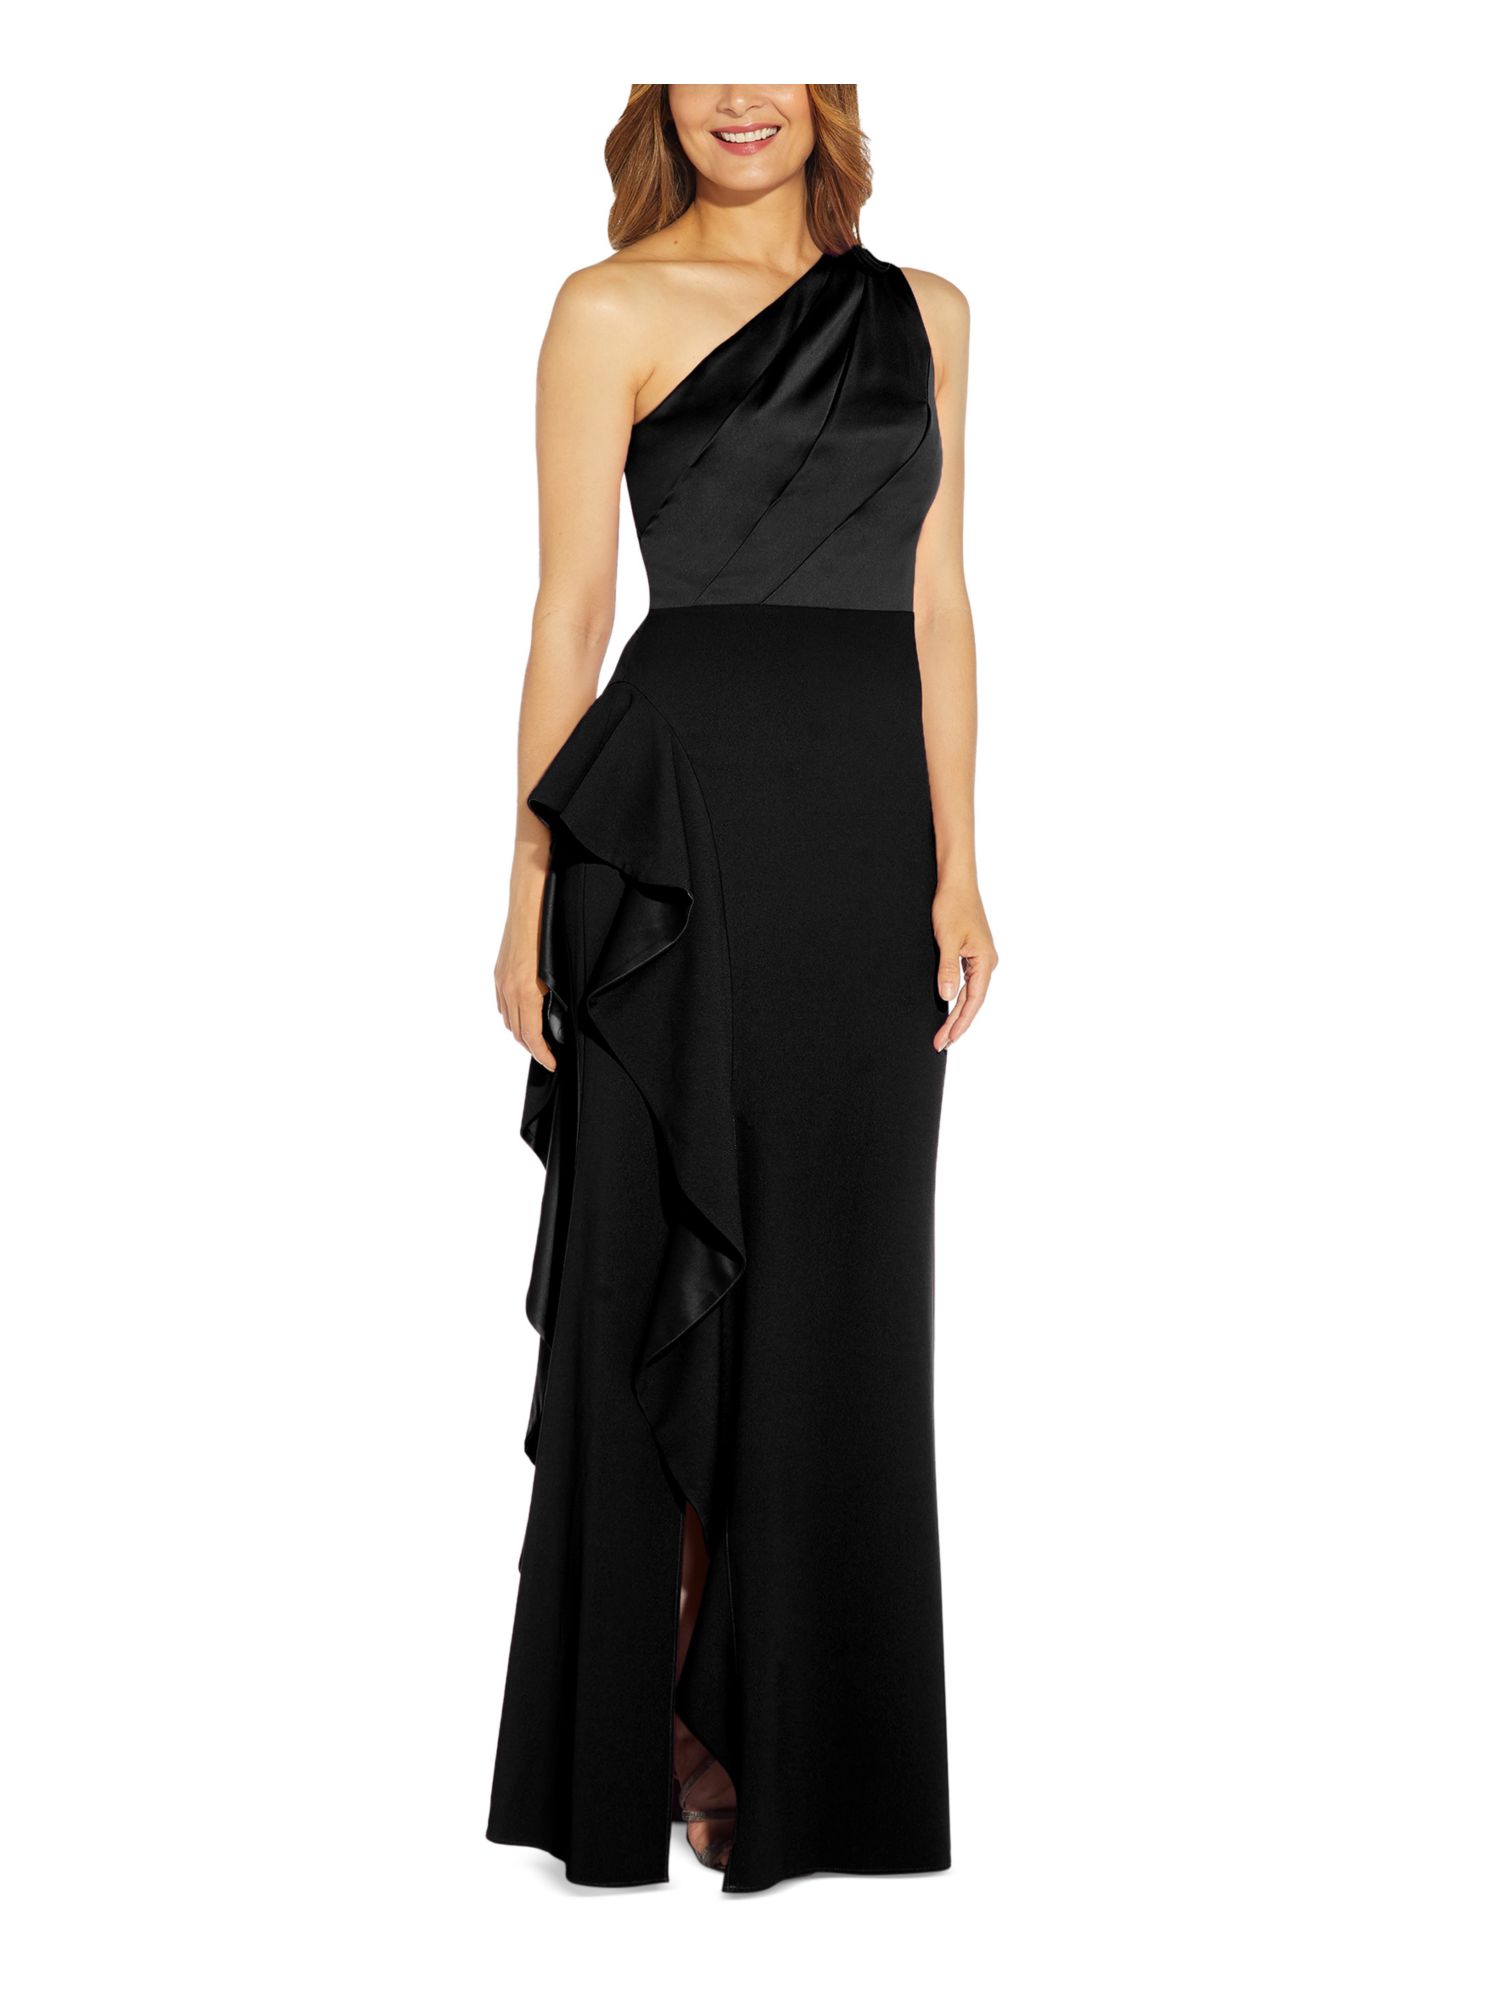 ADRIANNA PAPELL Womens Black Fitted Satin Cascading Side Ruffle Dress 14